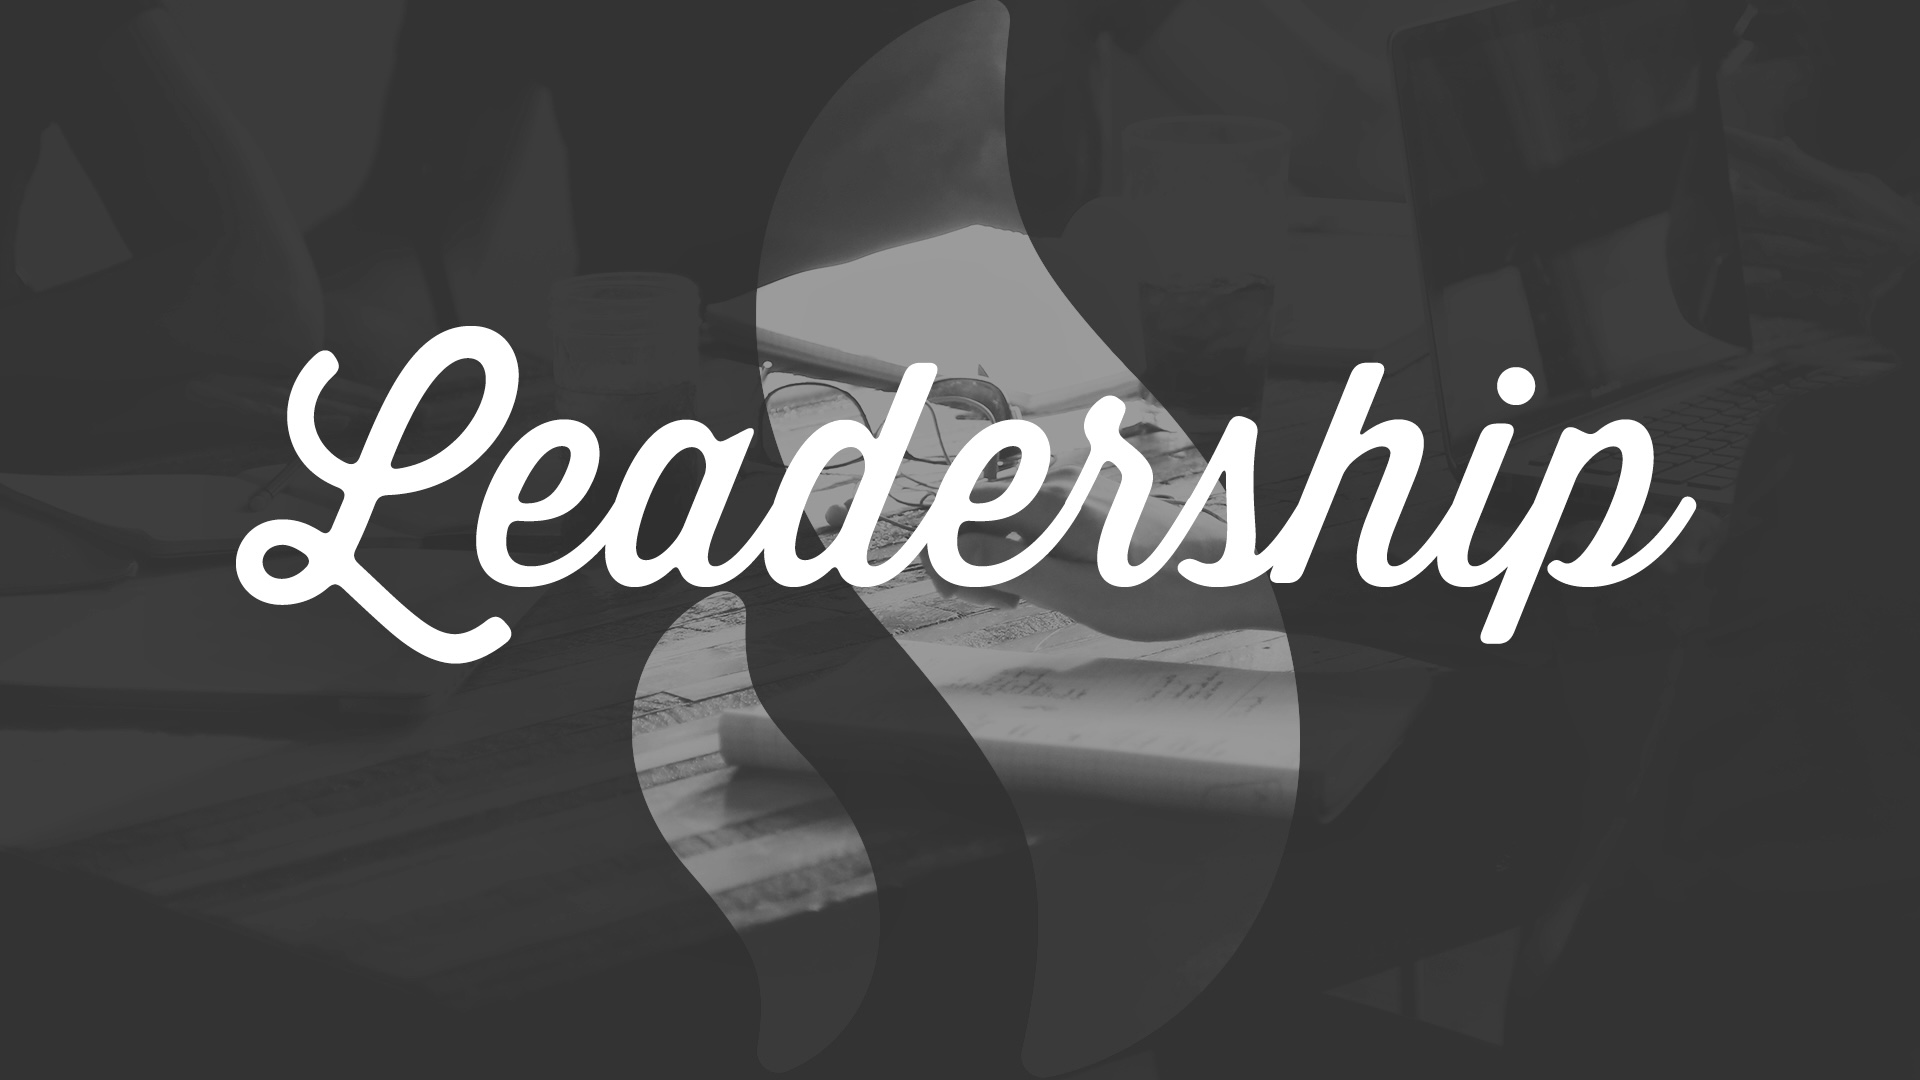 Leadership Track - Main Title Graphic - HD image